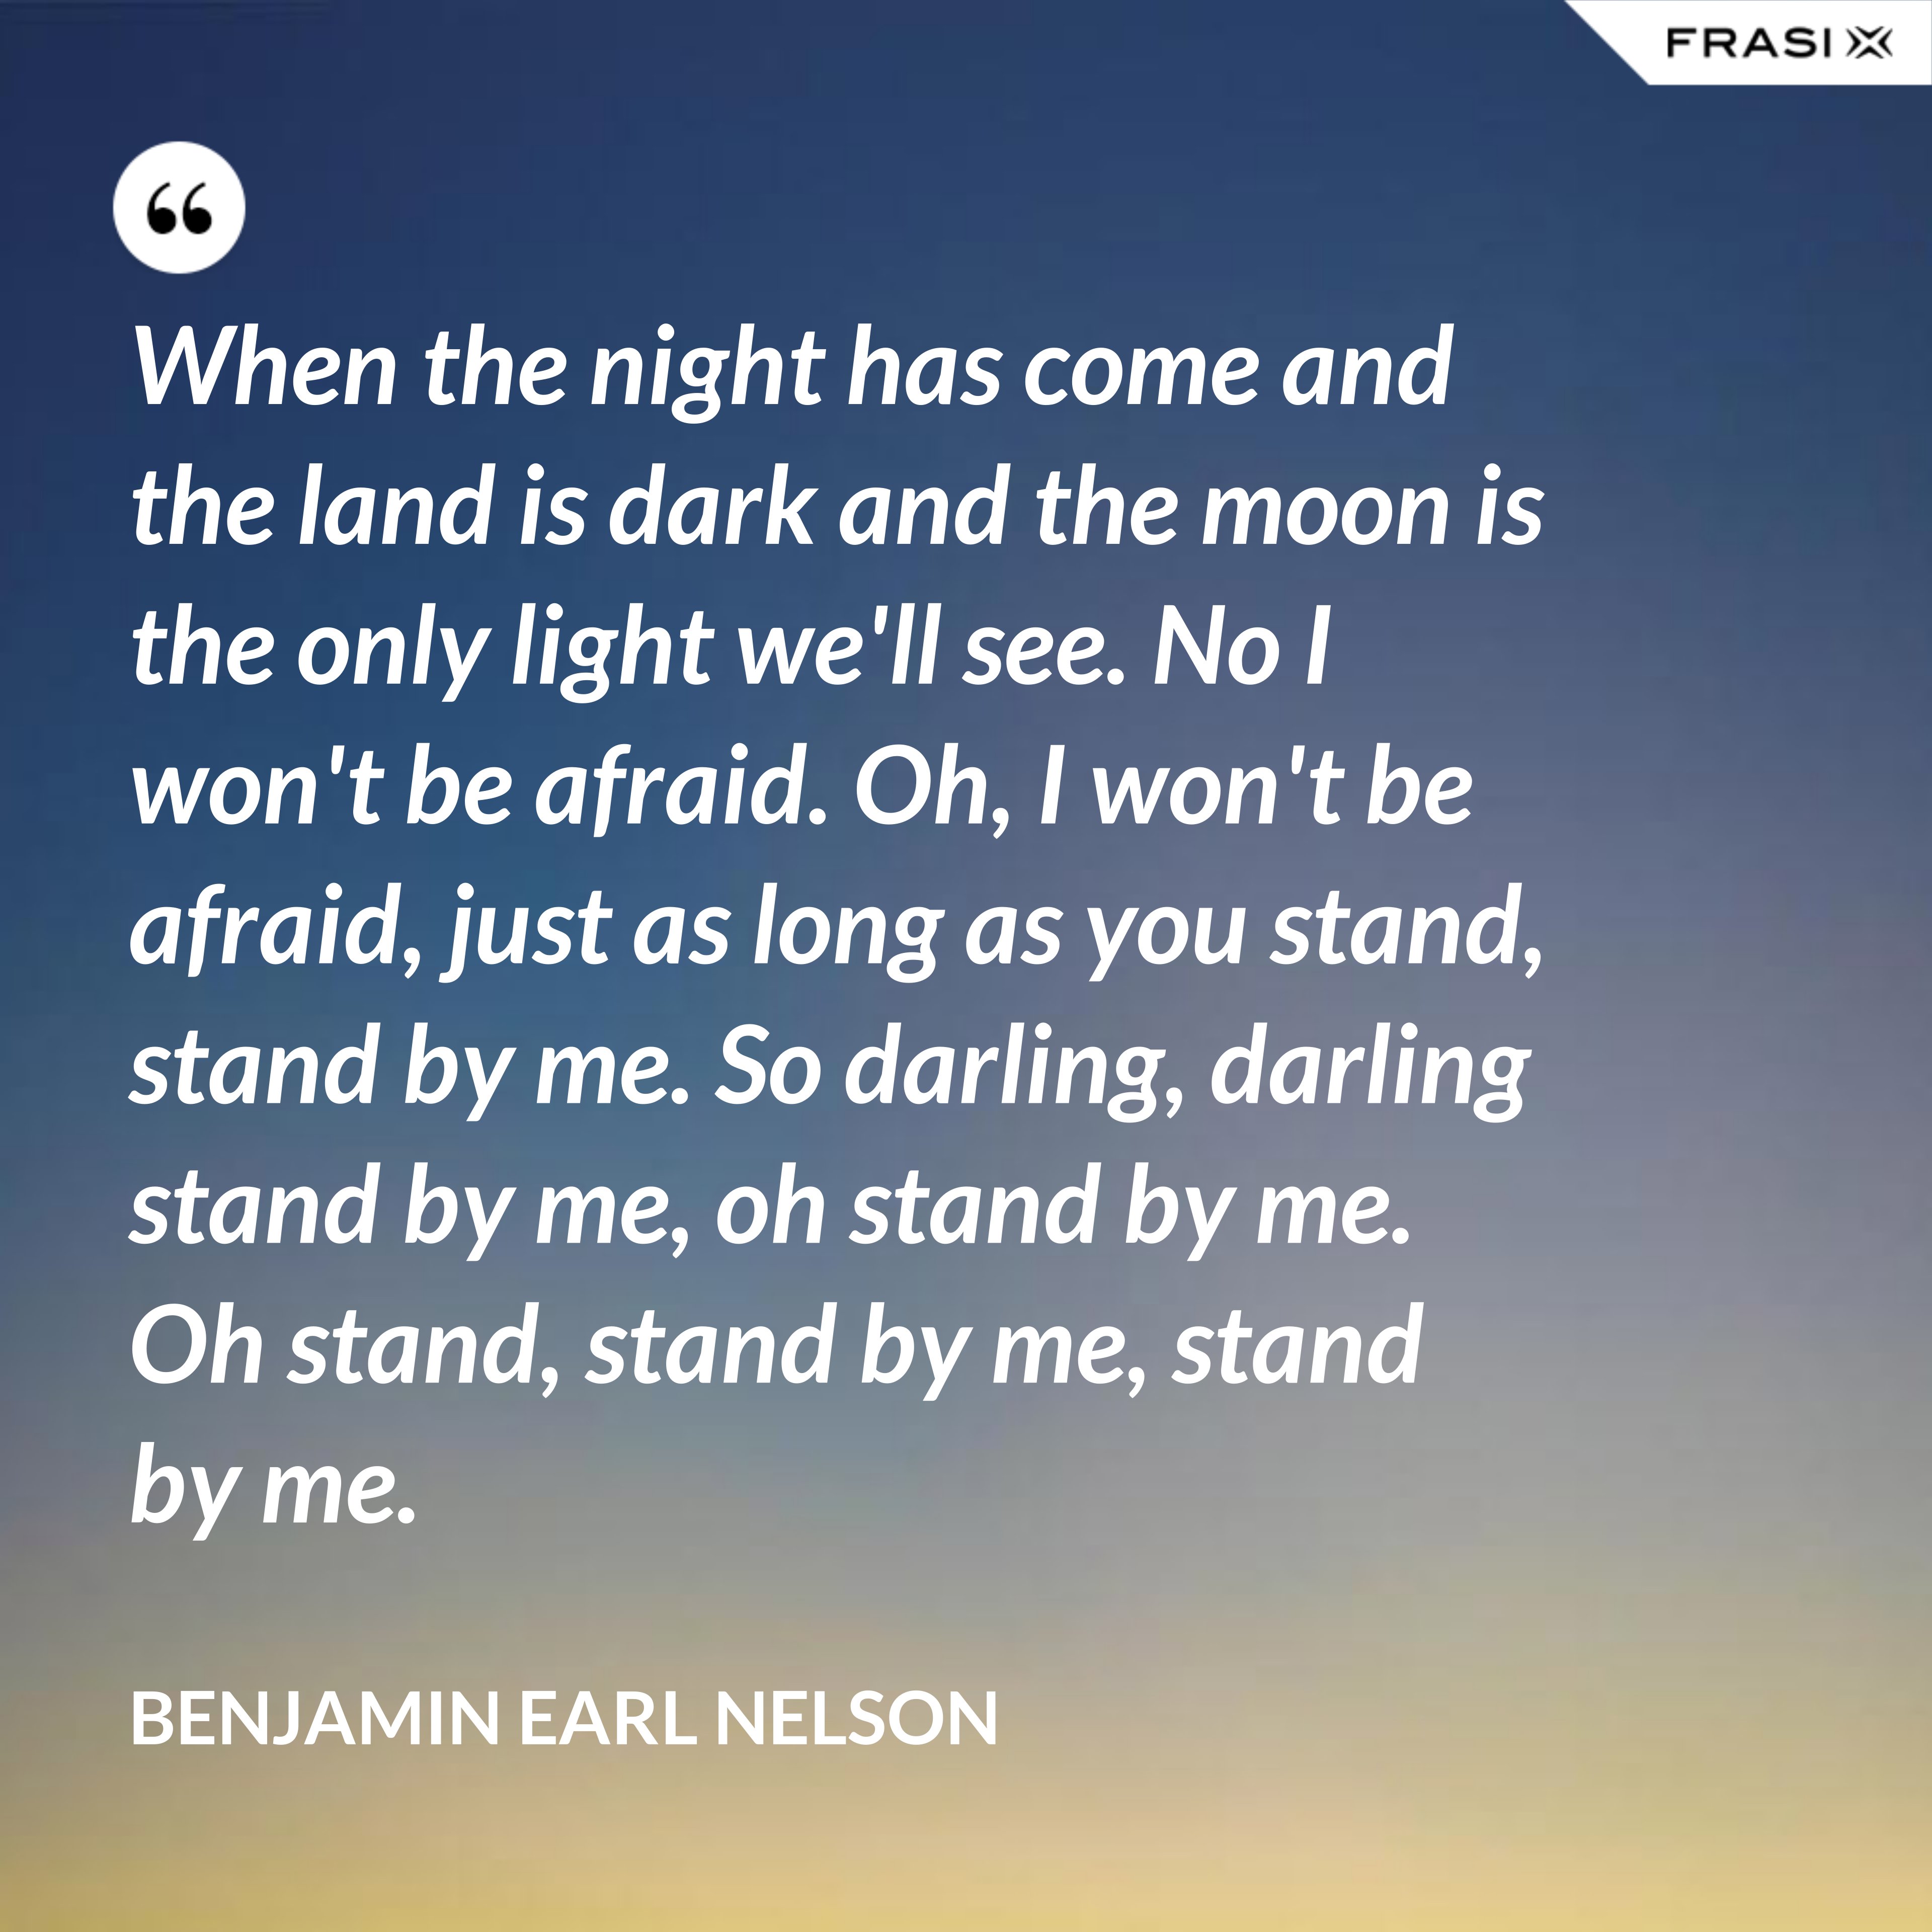 When the night has come and the land is dark and the moon is the only light we'll see. No I won't be afraid. Oh, I won't be afraid, just as long as you stand, stand by me. So darling, darling stand by me, oh stand by me. Oh stand, stand by me, stand by me. - Benjamin Earl Nelson